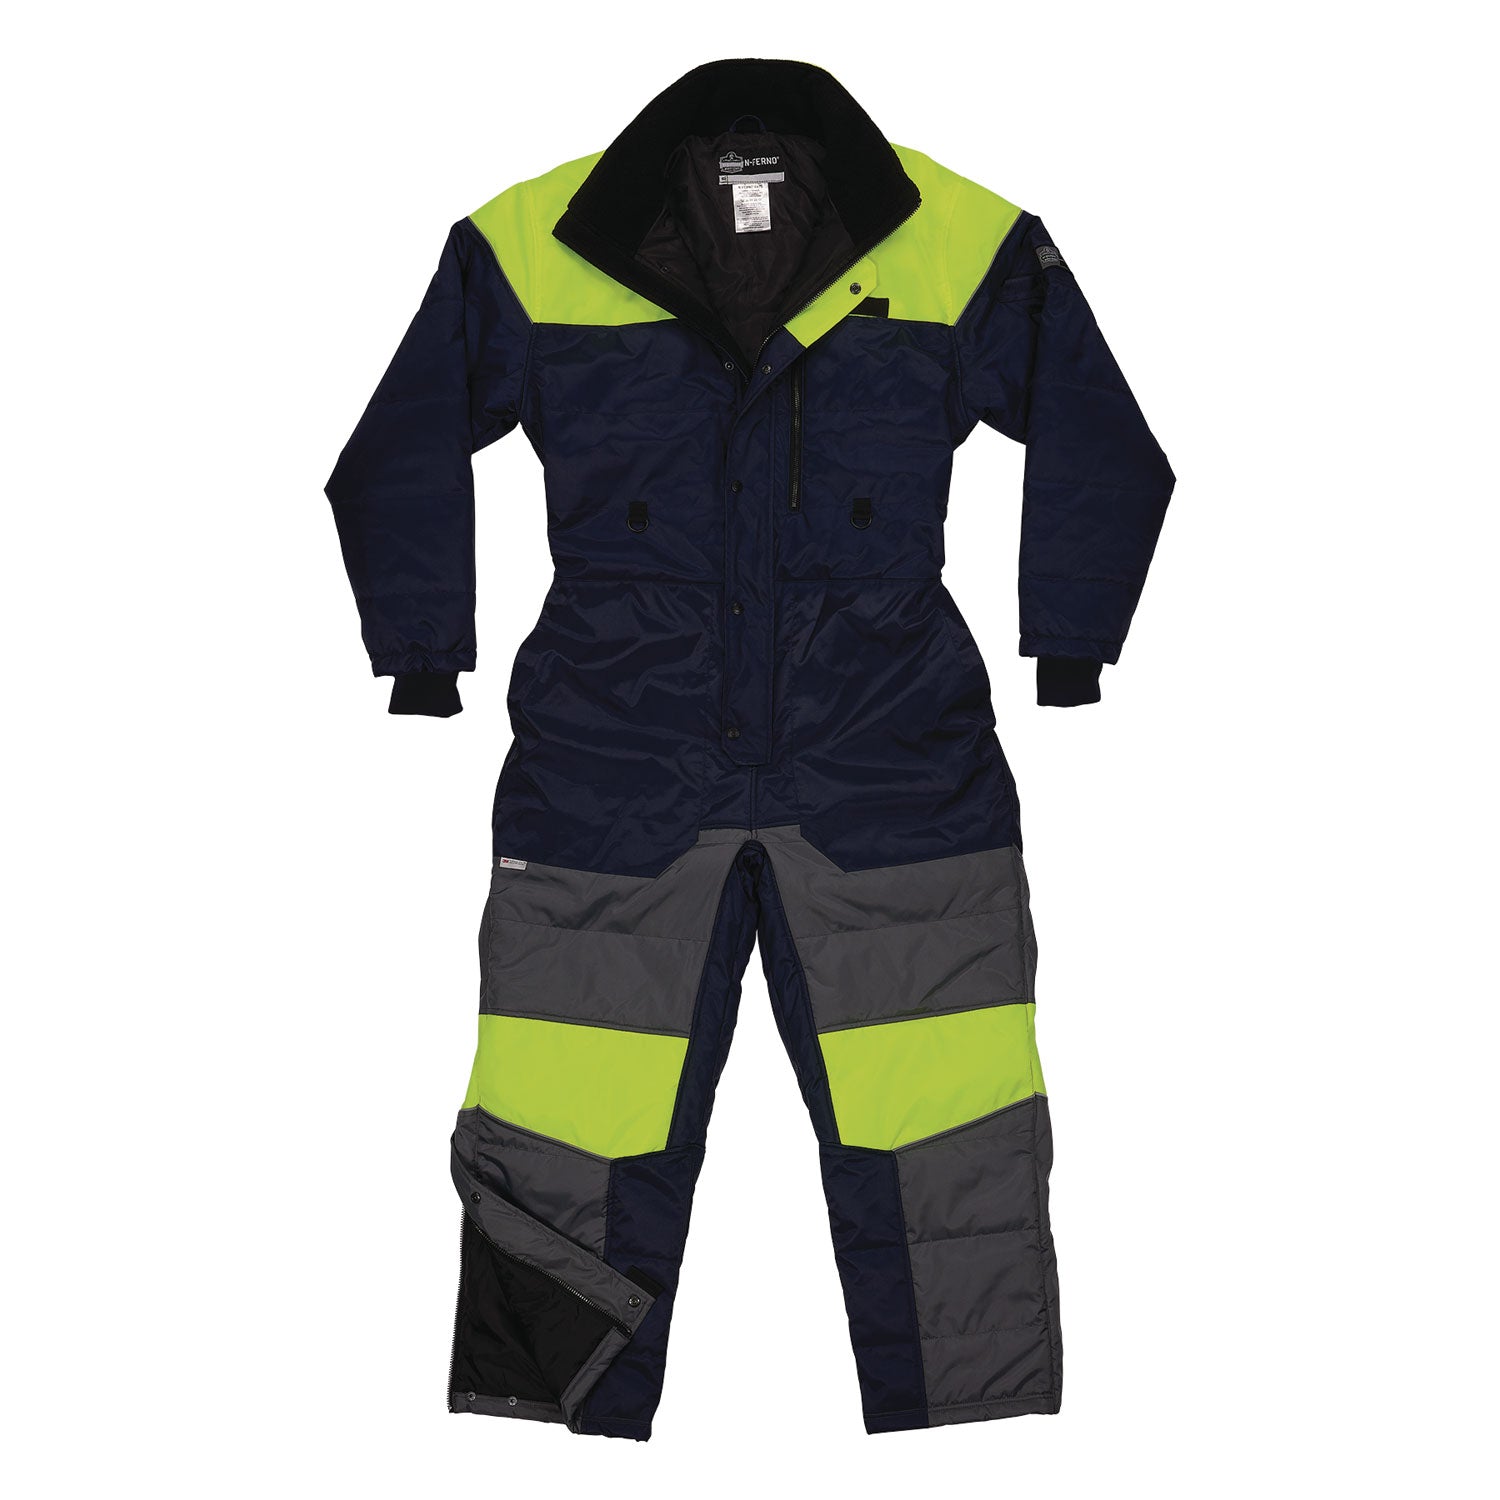 n-ferno-6475-insulated-freezer-coverall-large-navy-ships-in-1-3-business-days_ego41244 - 1